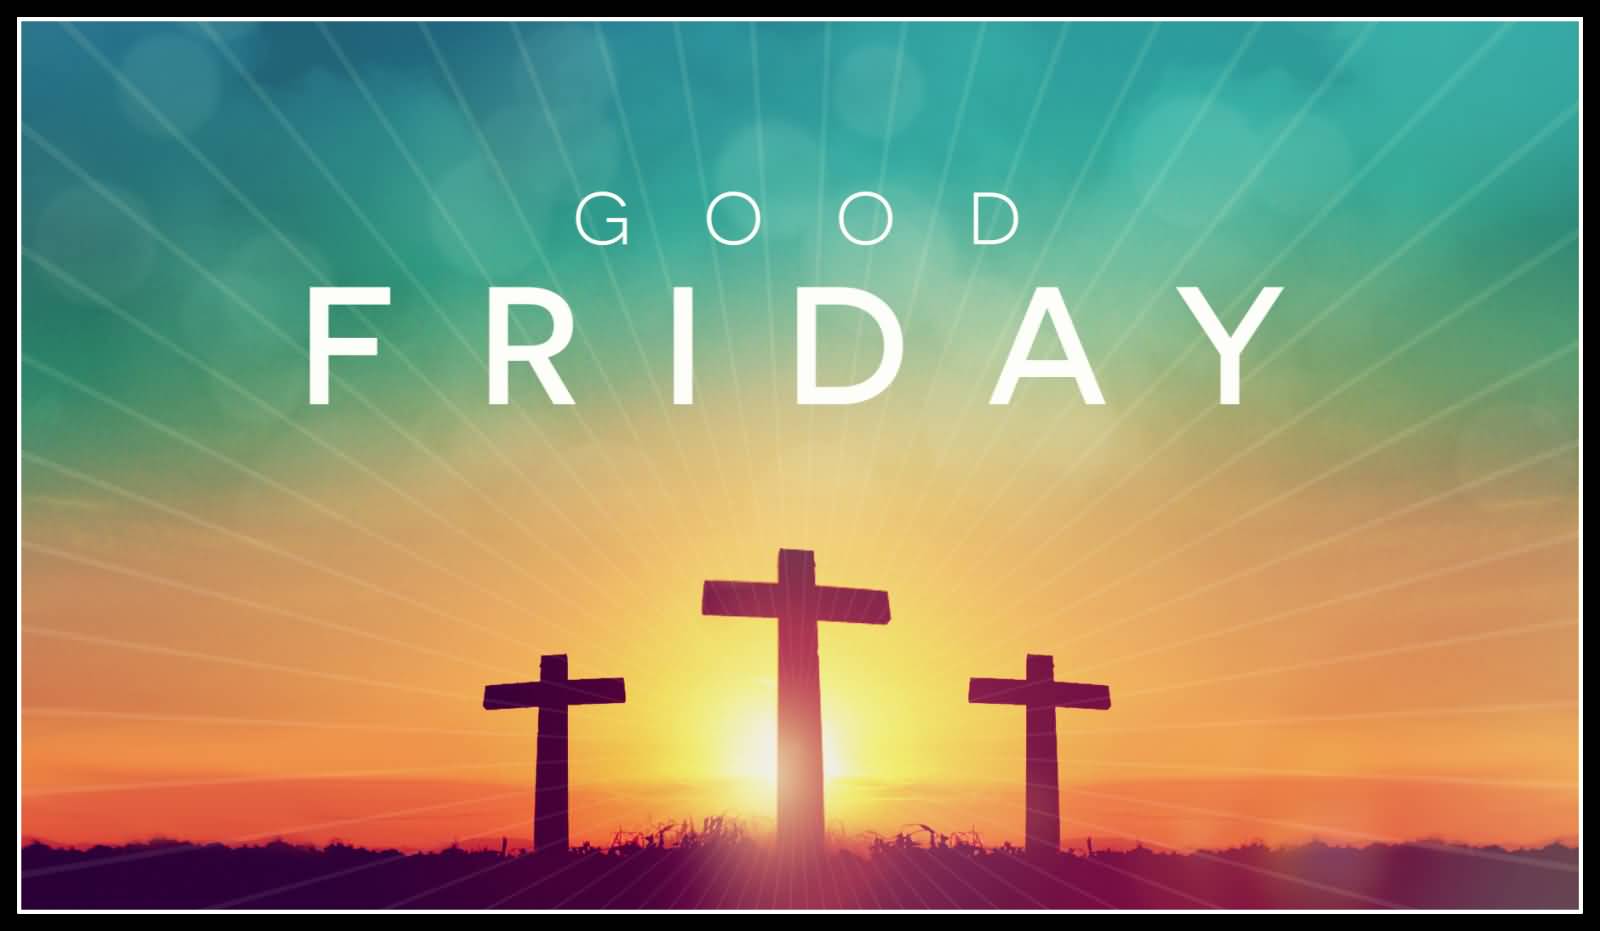 60 Good Friday Greeting Card Pictures And Images